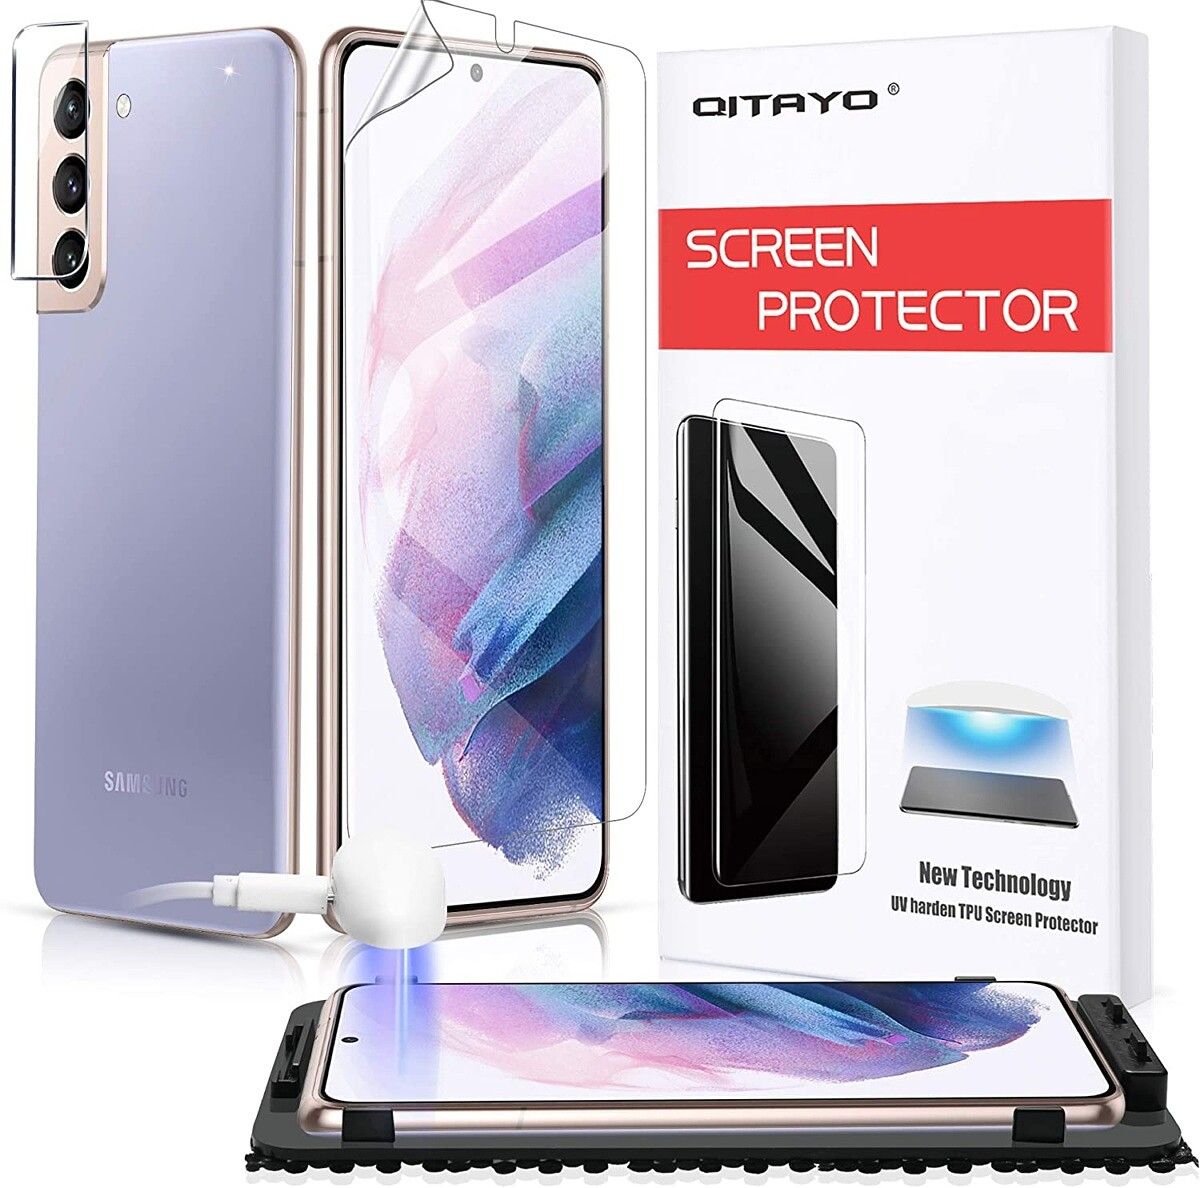 QITYAO's screen protector is a little bit unique! You have the protector harden with a UV light that's included in the box, so you'll get tough, superior protection without the hassle of a tempered glass application.